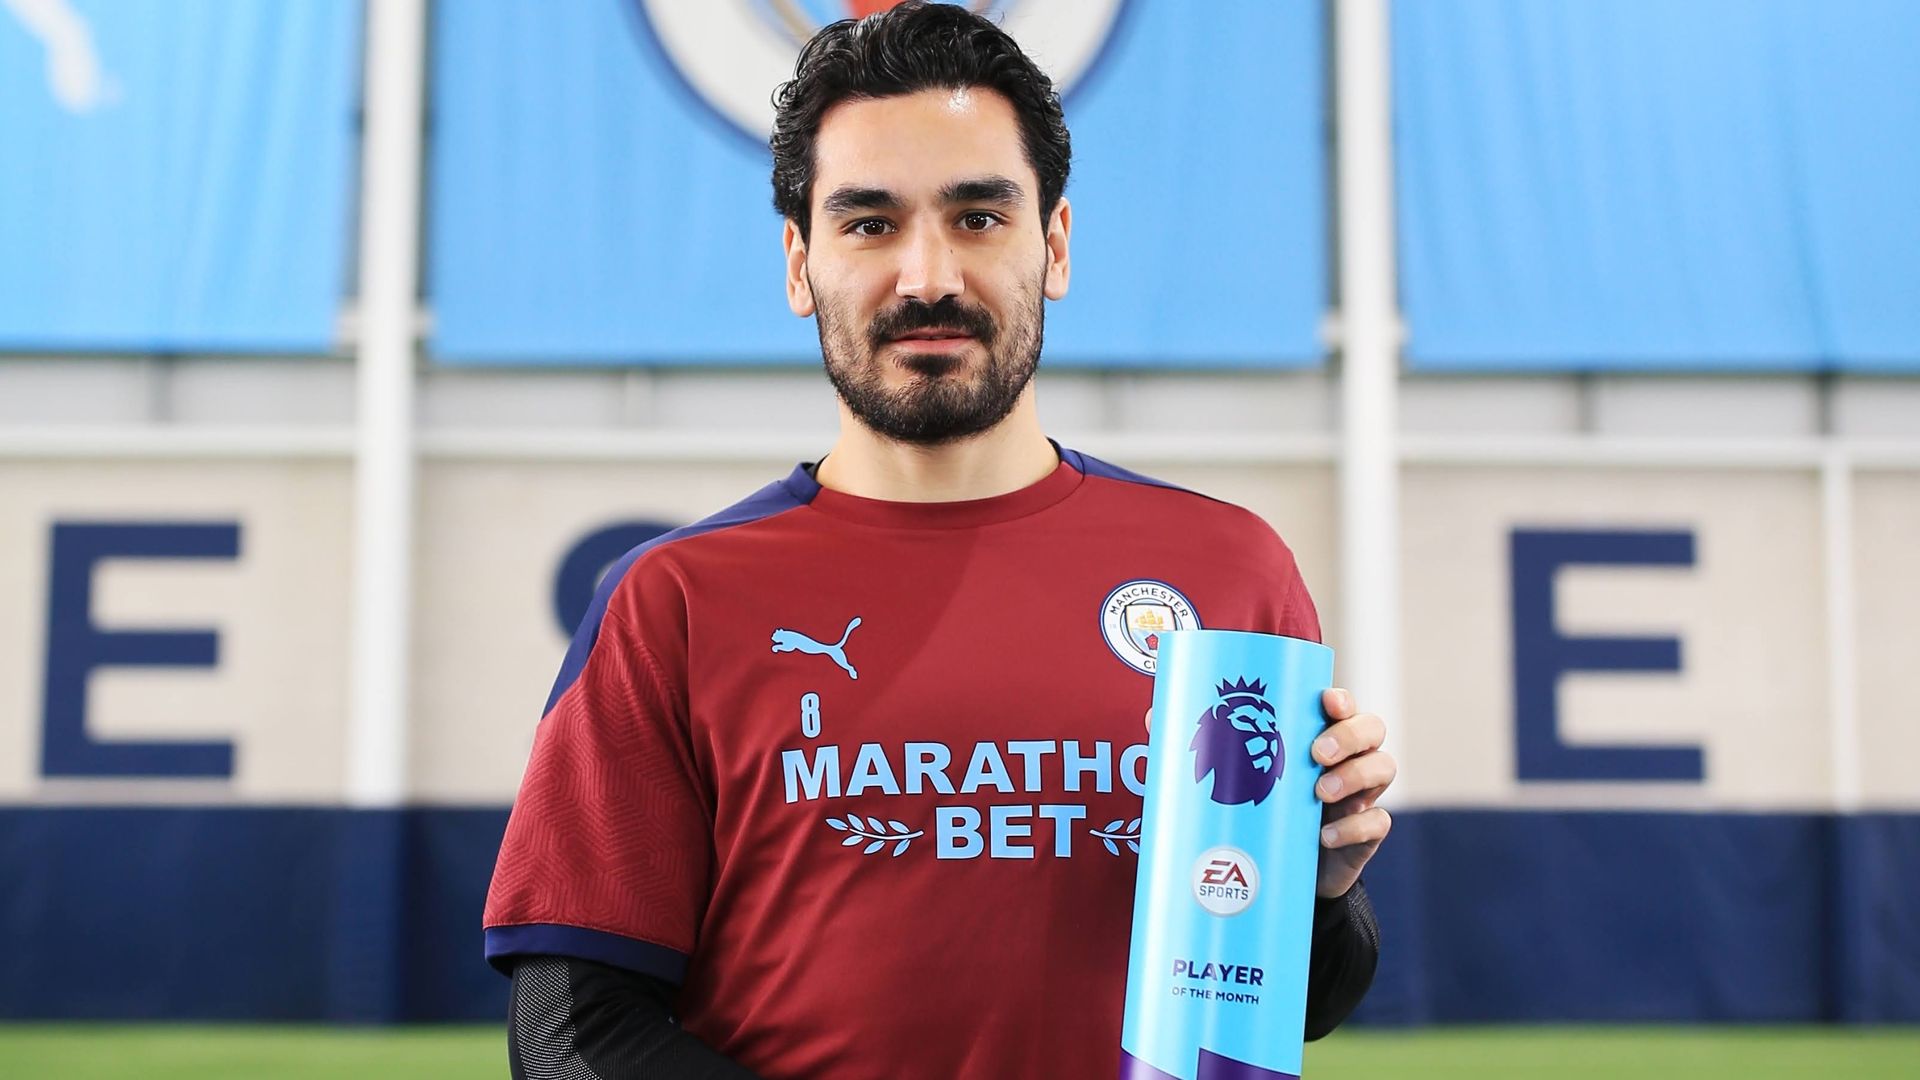 Gundogan wins back-to-back Player of the Month awards